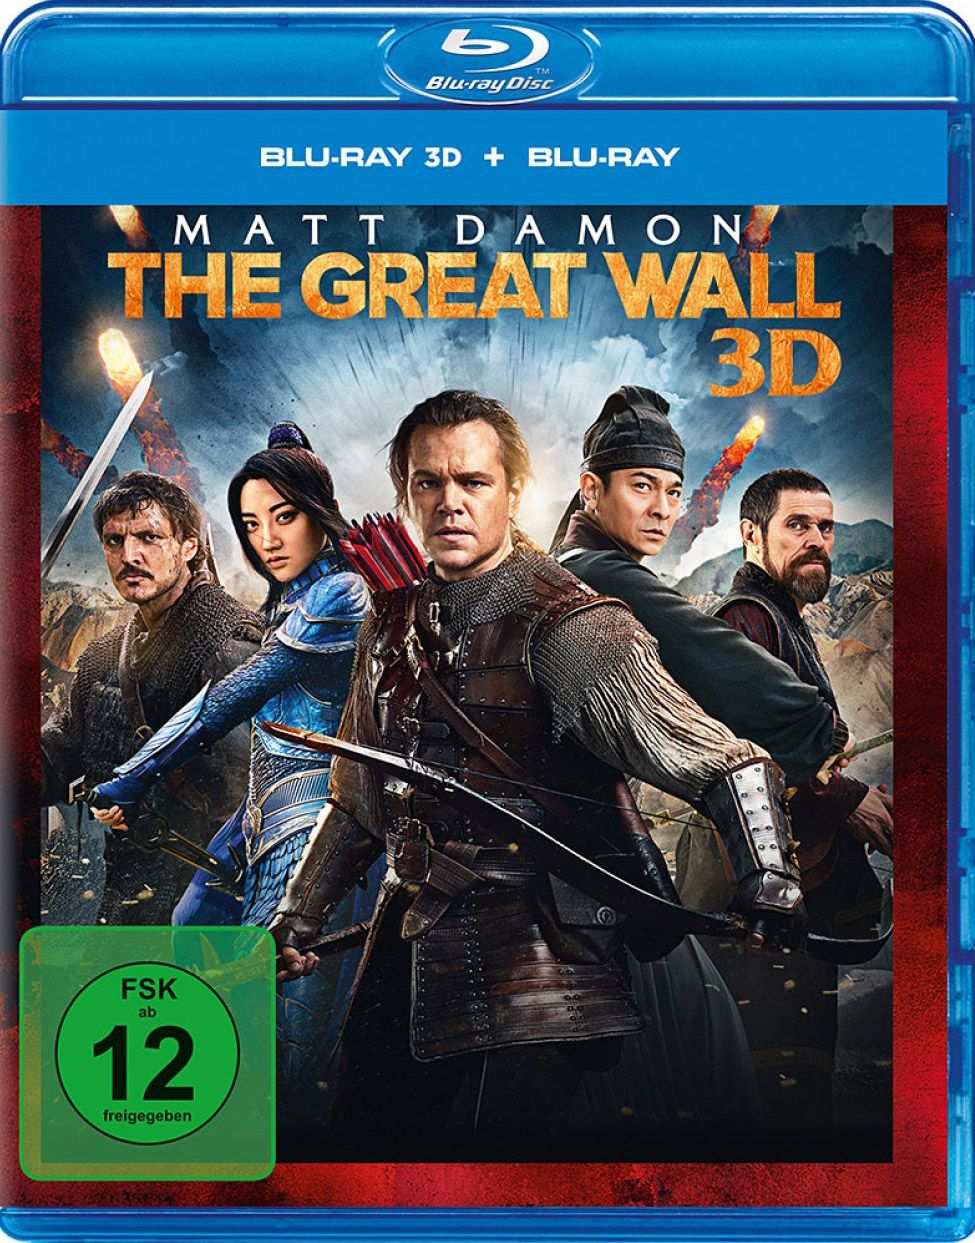 Great Wall 3D, The (2 Discs) (BLURAY 3D + BLURAY)